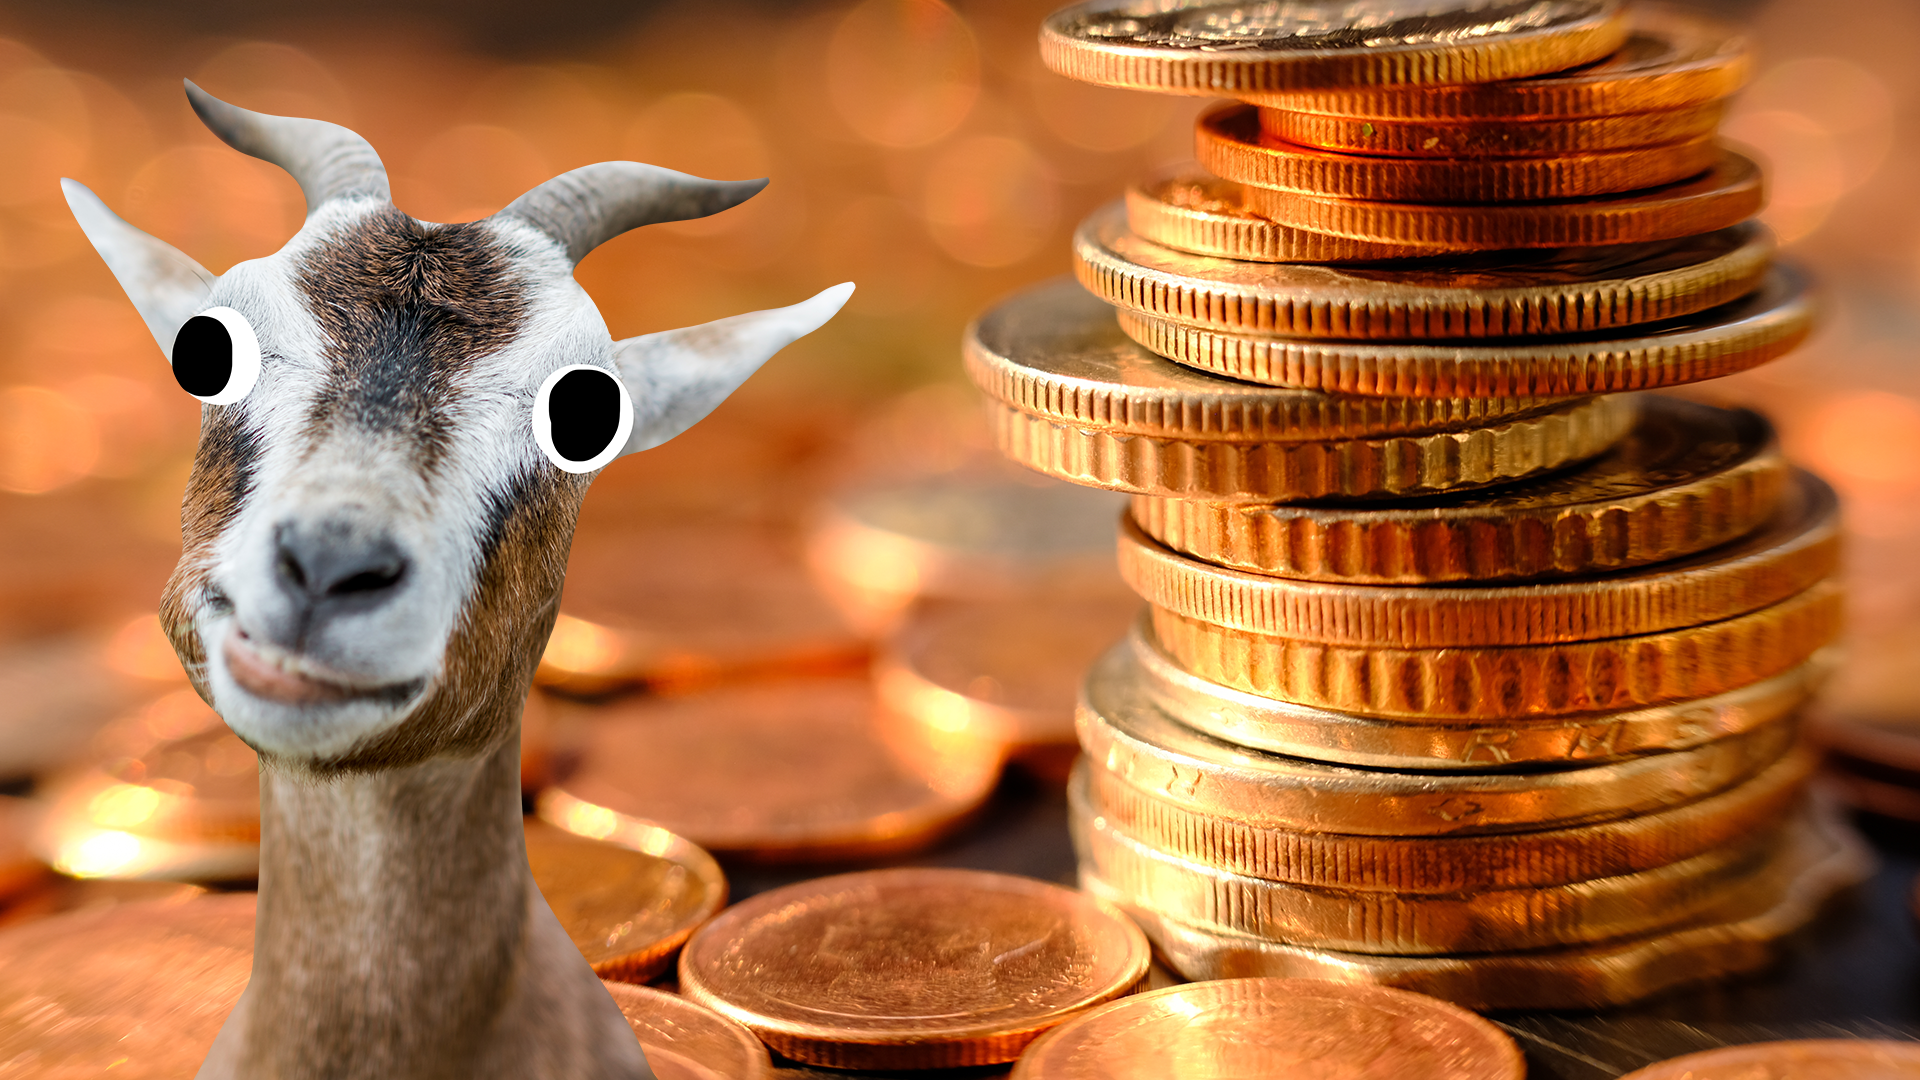 Stack on coins and a derpy goat